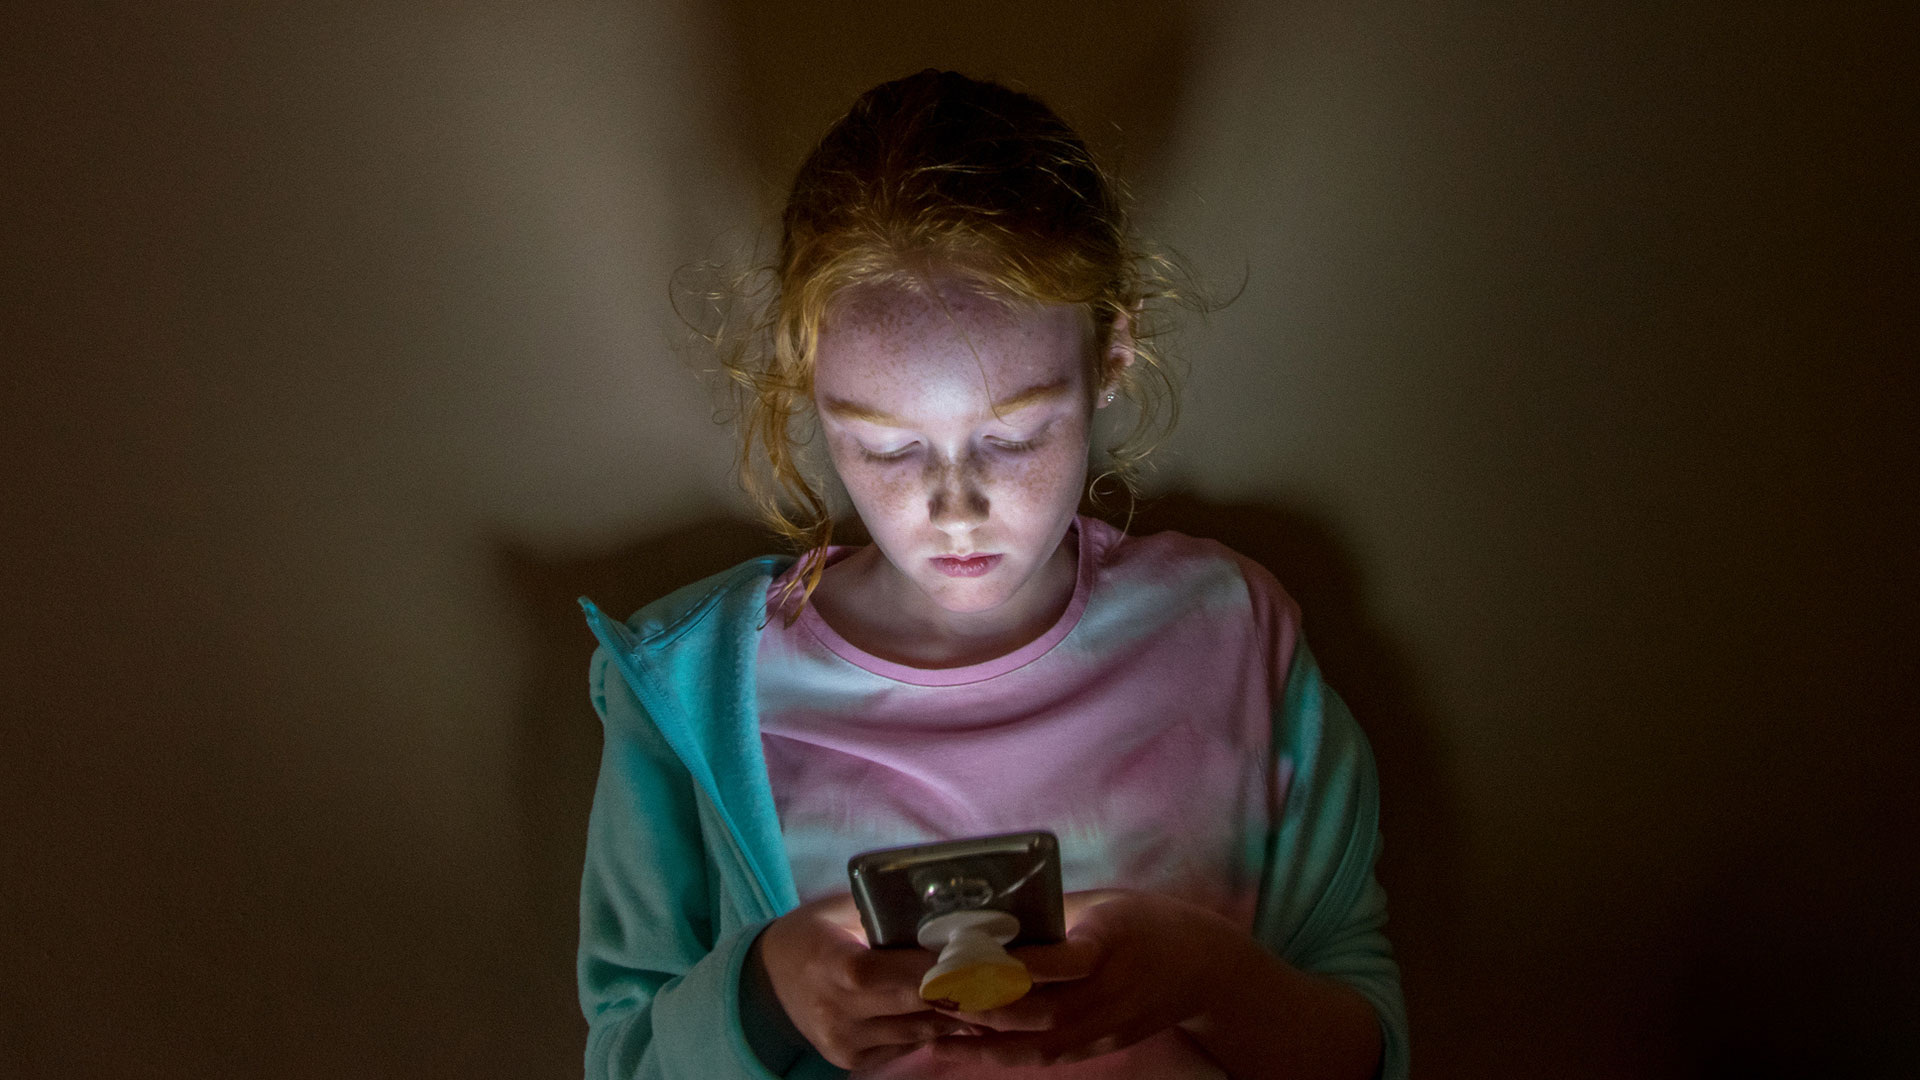 A young long haired redhead girl with face lit up looking into mobile phone screen in a dark room, against a flat wall, with sad facial expression